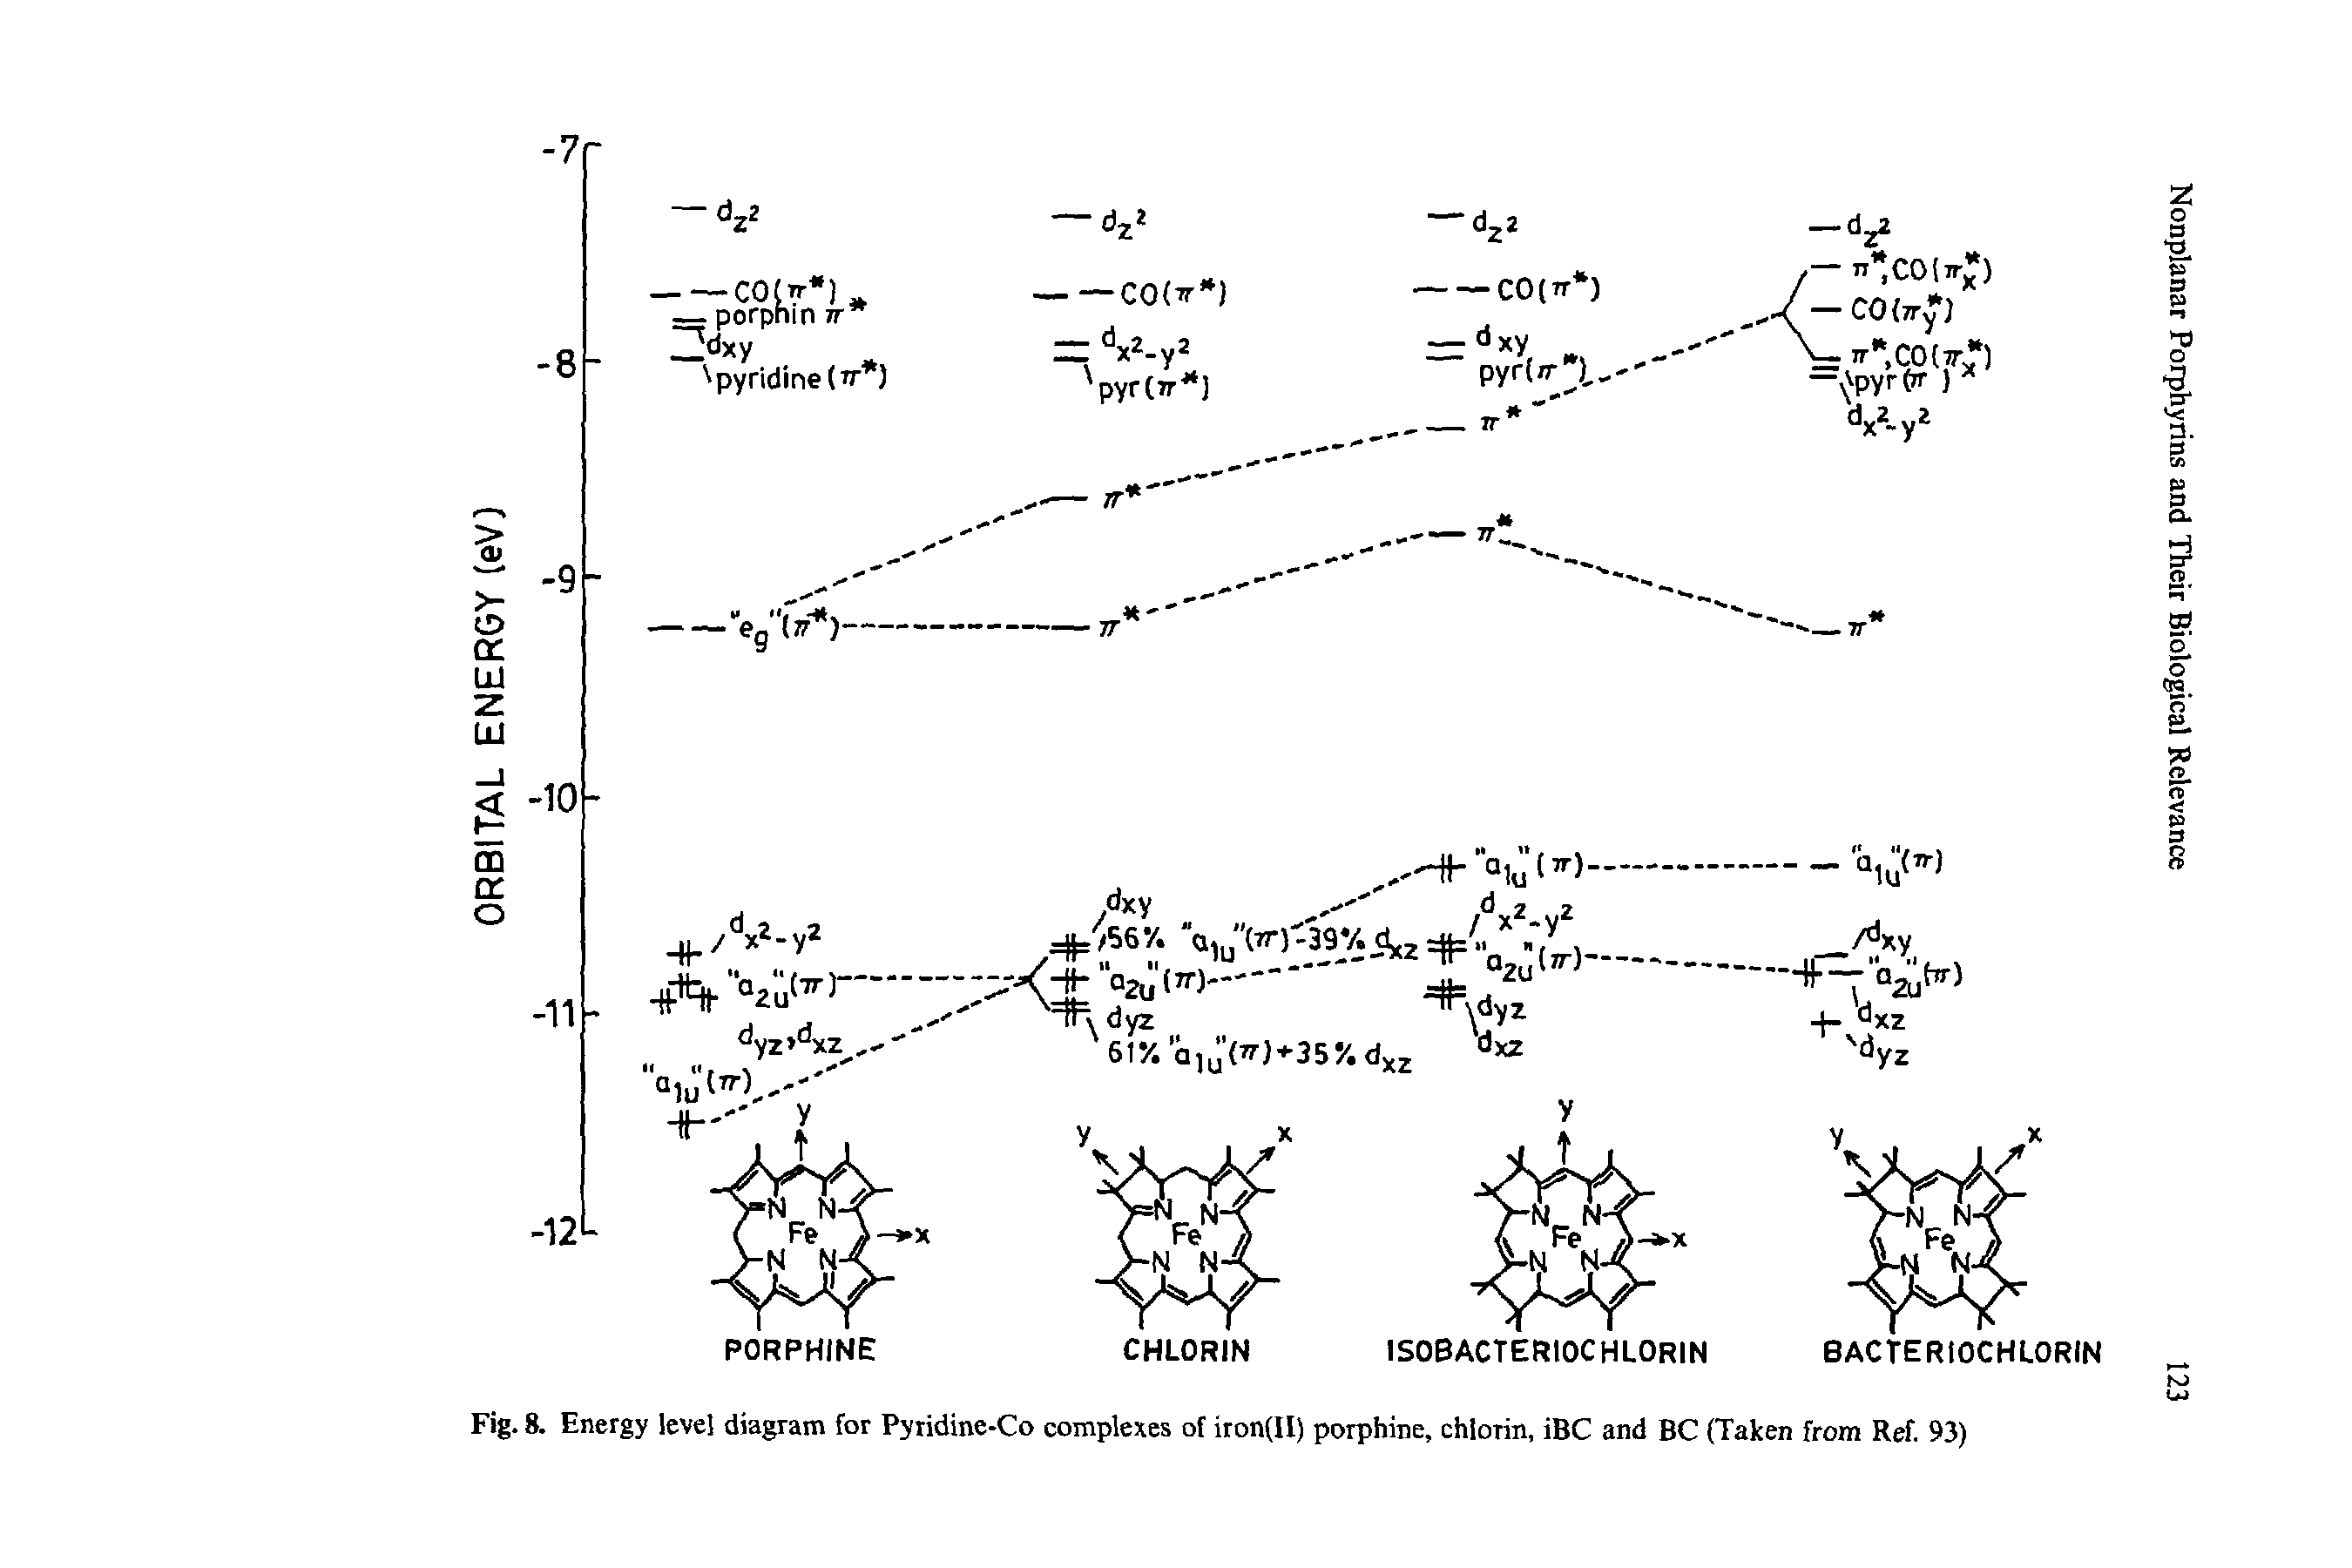 Fig. 8. Energy level diagram for Pyridine-Co complexes of iron(II) porphine, chlorin, iBC and BC (Taken from Ref. 93)...